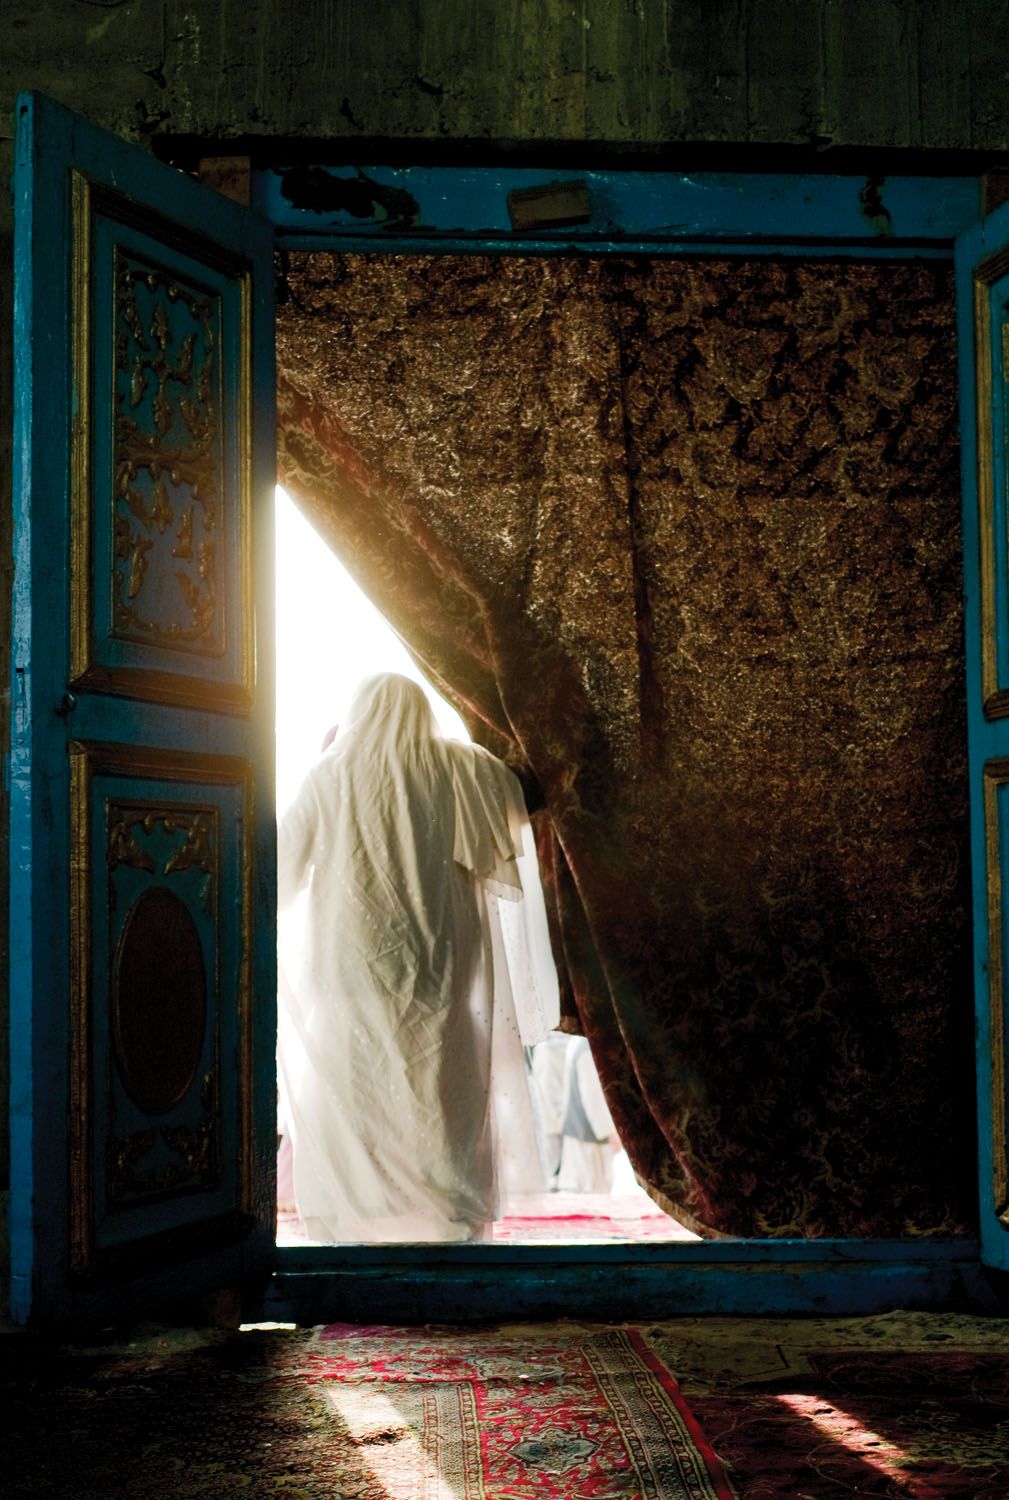 A Sufi shrine at a mosque frequented by Hazara, often the target of Daesh and Taliban attacks. Image by Monika Bulaj. Afghanistan, 2010.